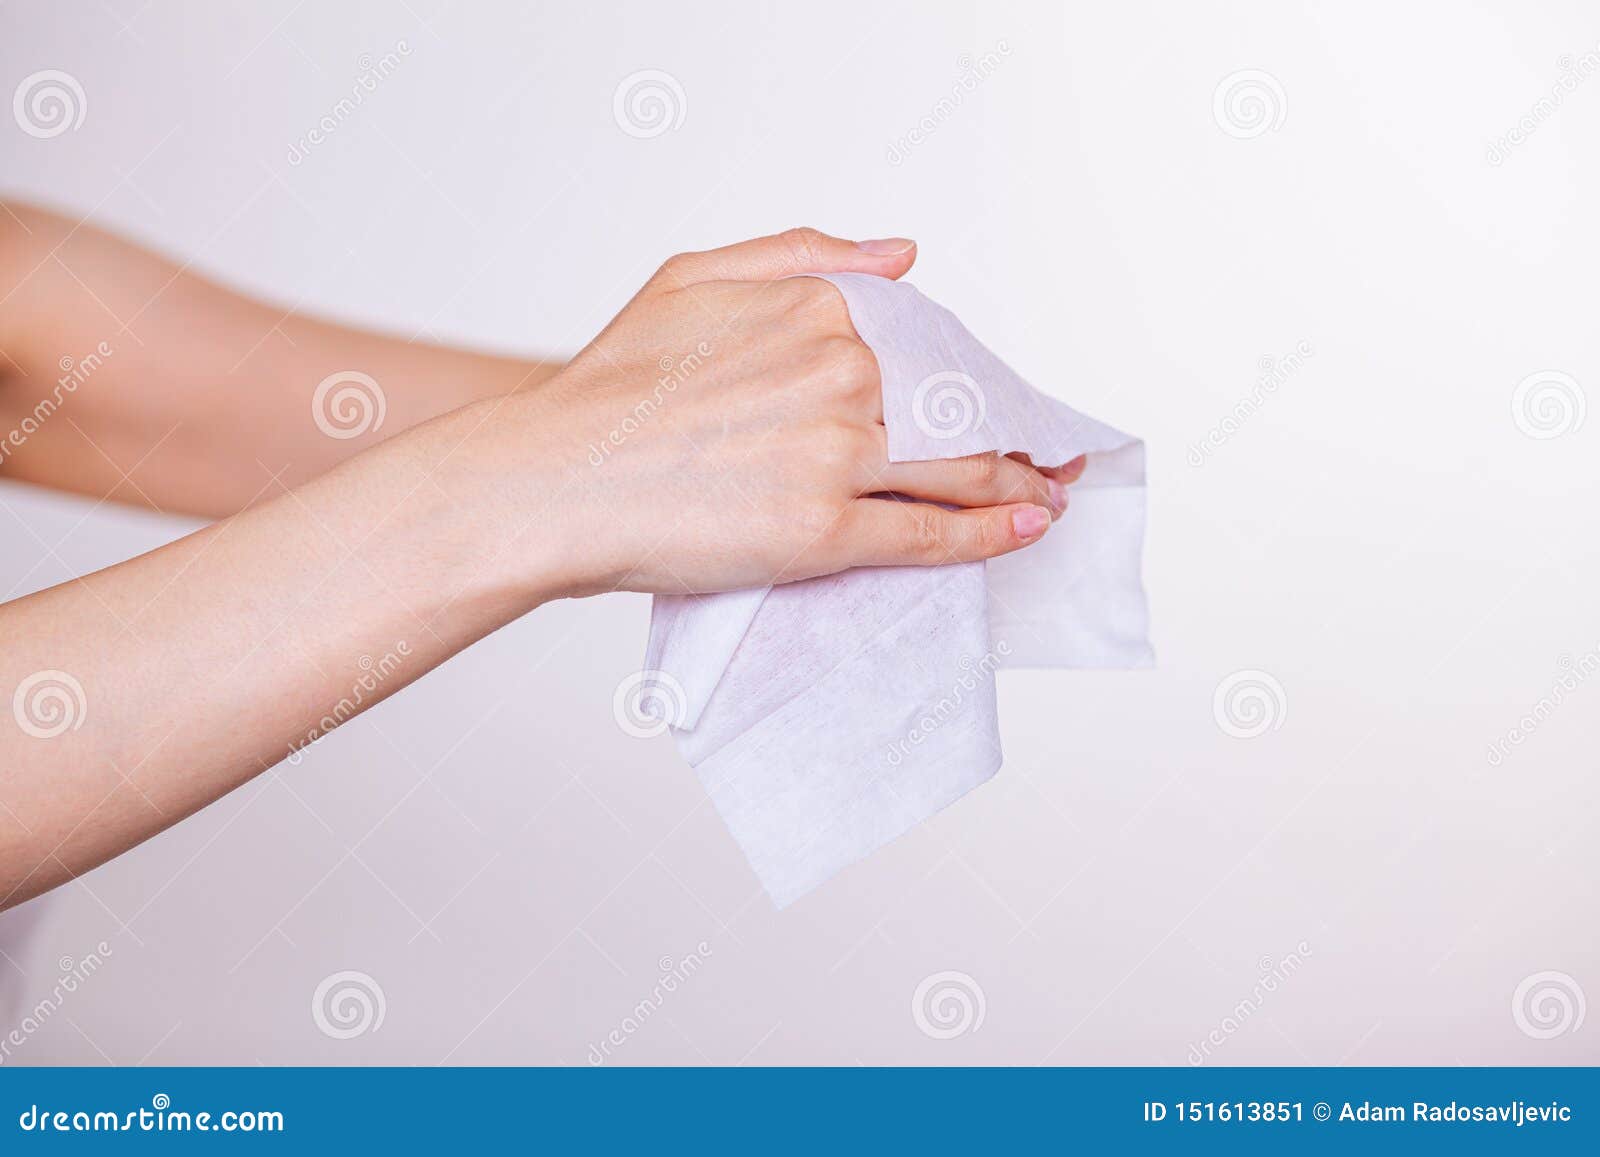 two hands cleaning with wet wipes